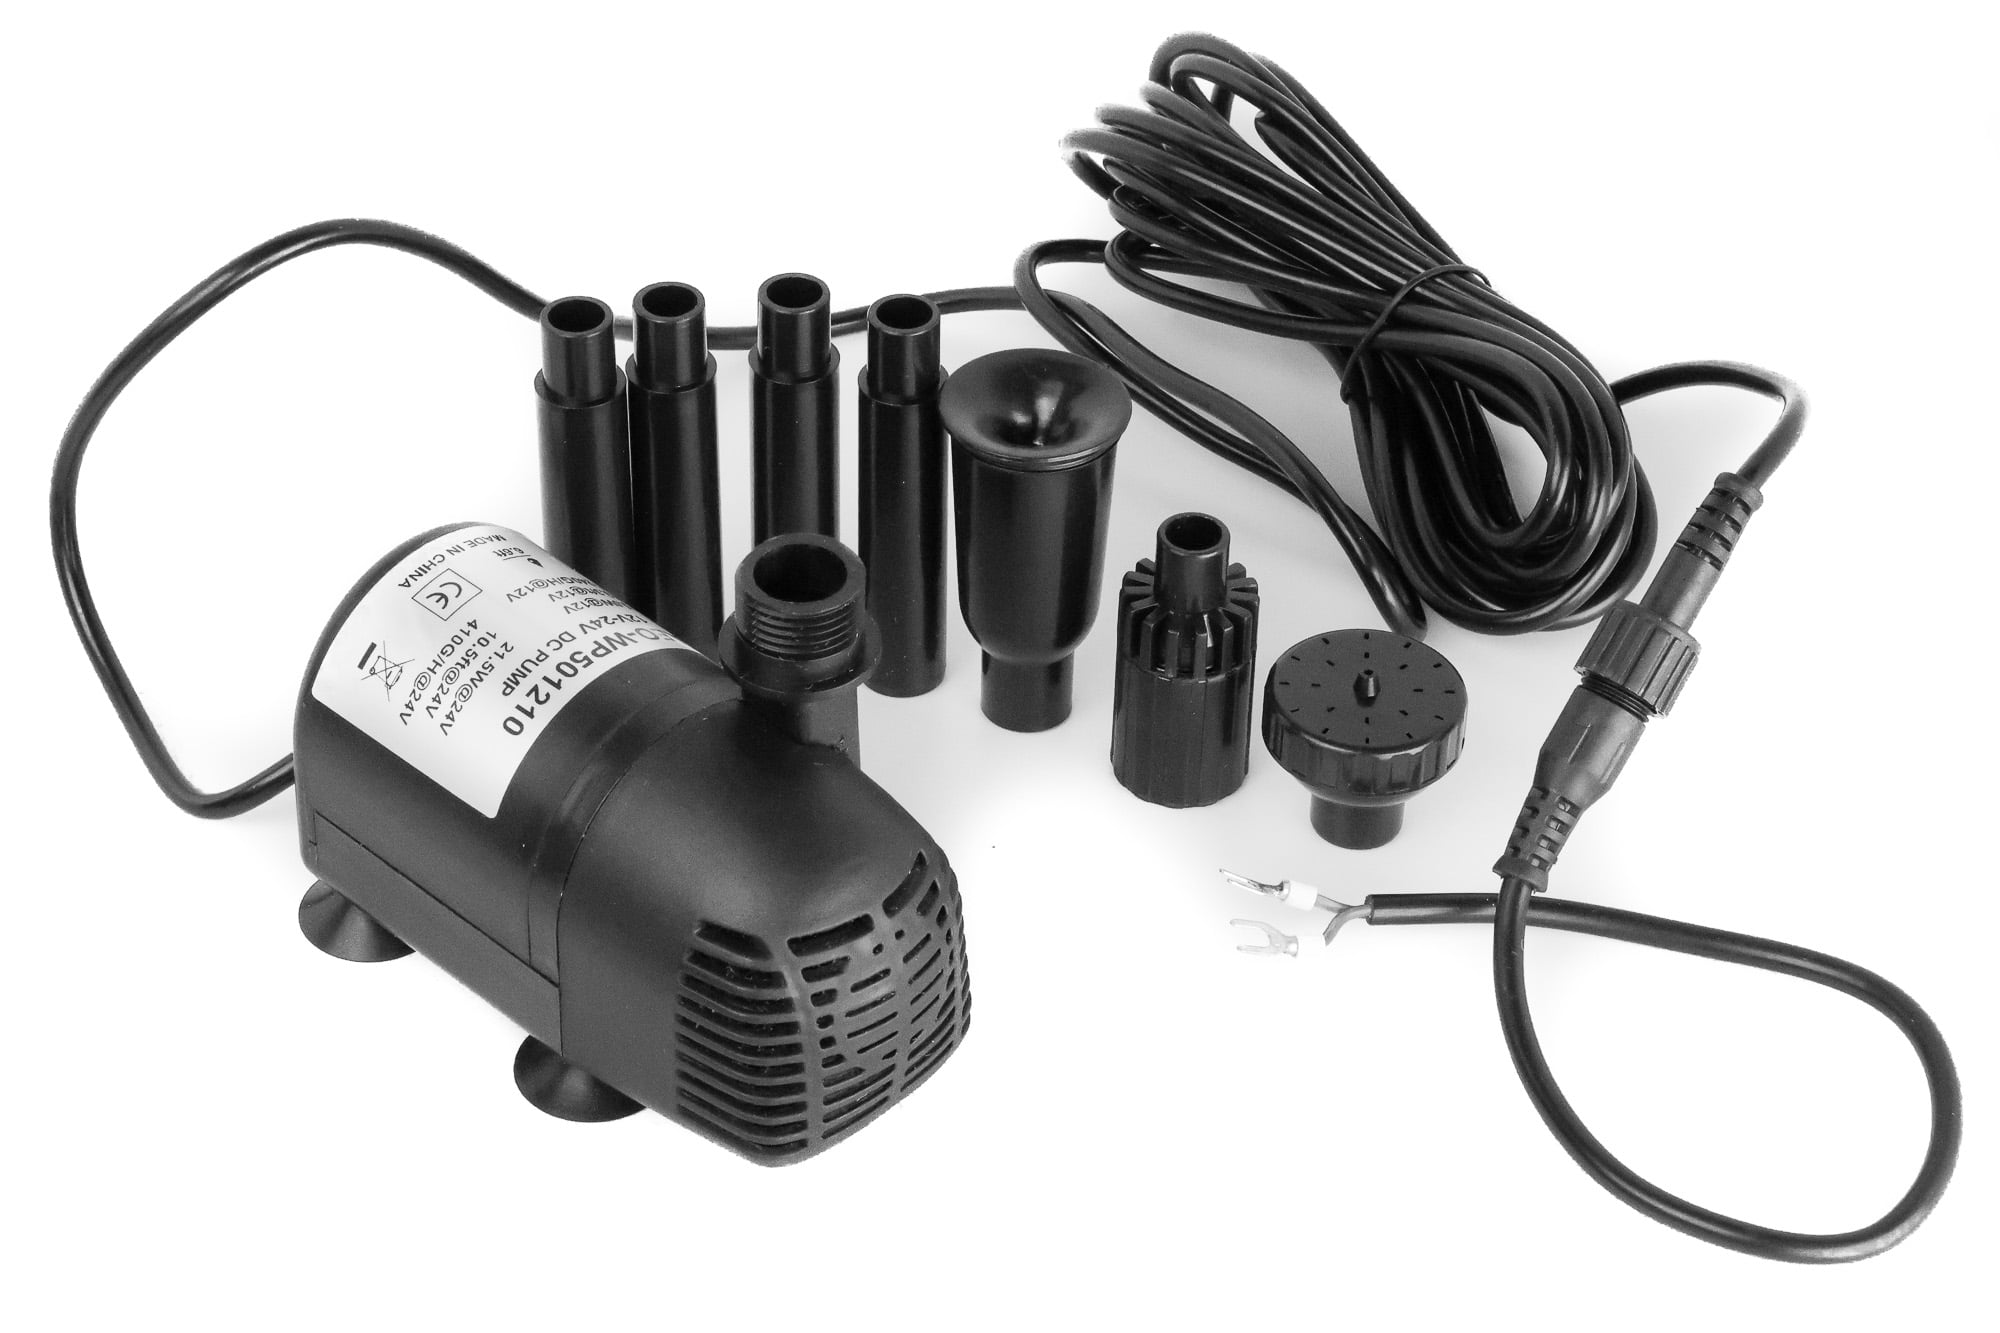 pool Garden Waterfall Fish Tank Hydroponic FREESEA Submersible Pond Water Pump: 160 GPH 8W Ultra Quiet Adjustable Outdoor Fountain Pump with 5ft Power Cord for Aquarium 